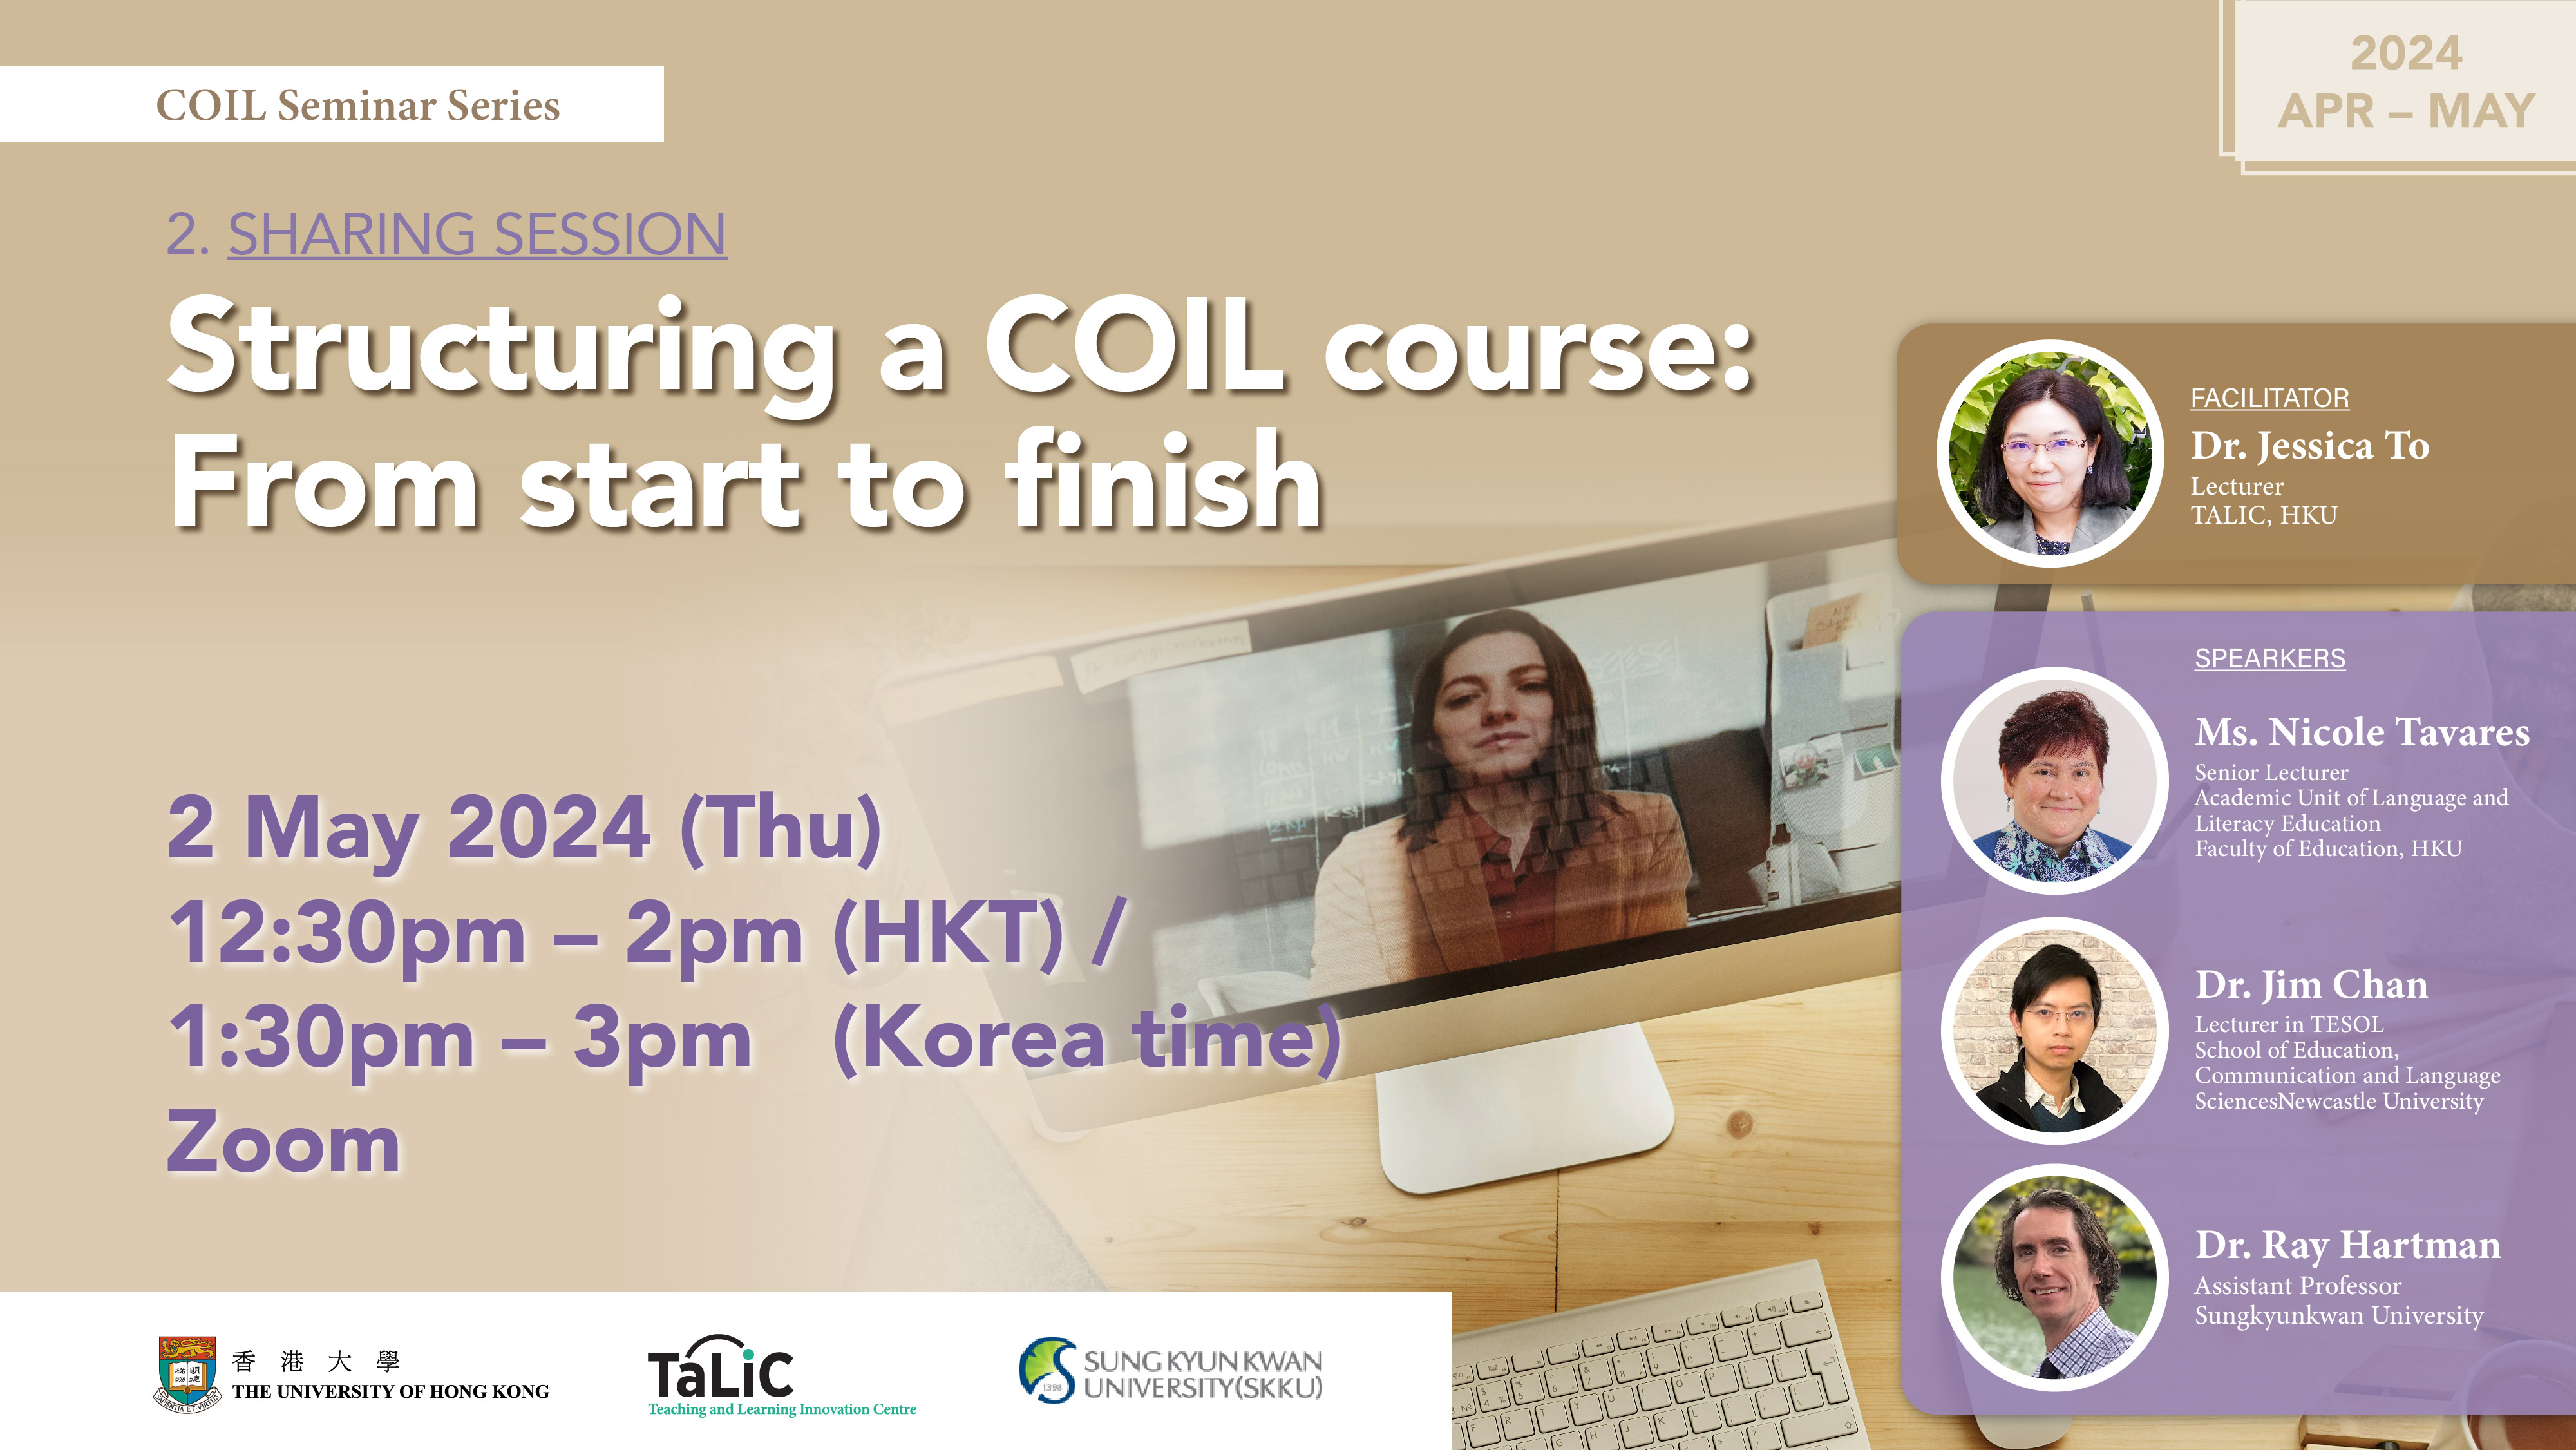 2. Sharing Session | Structuring a COIL course: From start to finish